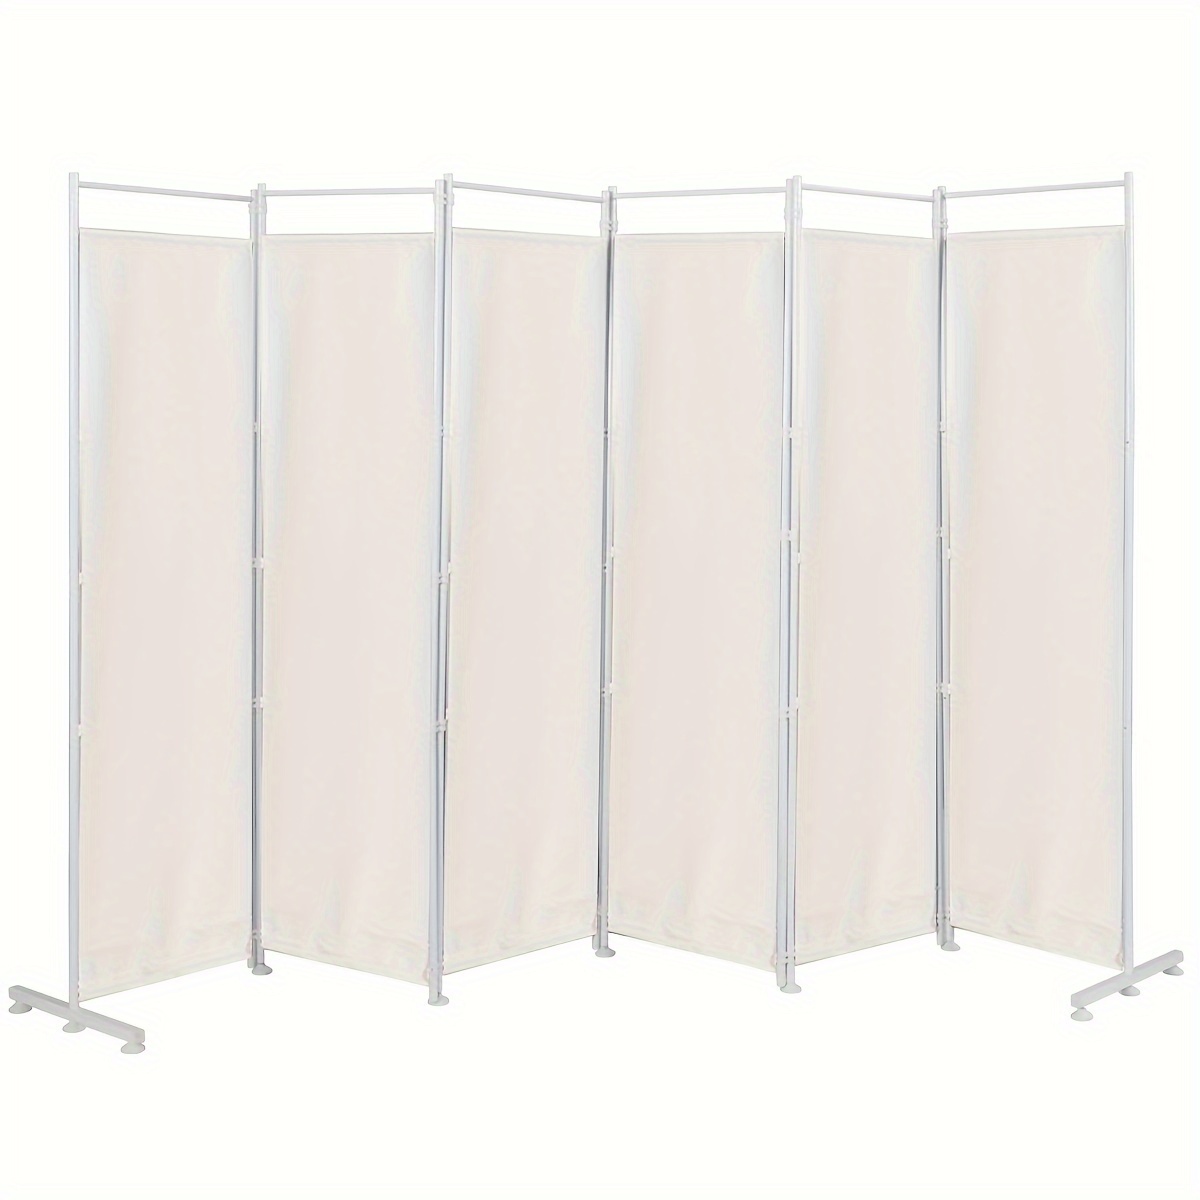 

Costway 6-panel Room Divider Folding Privacy Screen W/steel Frame Decoration White